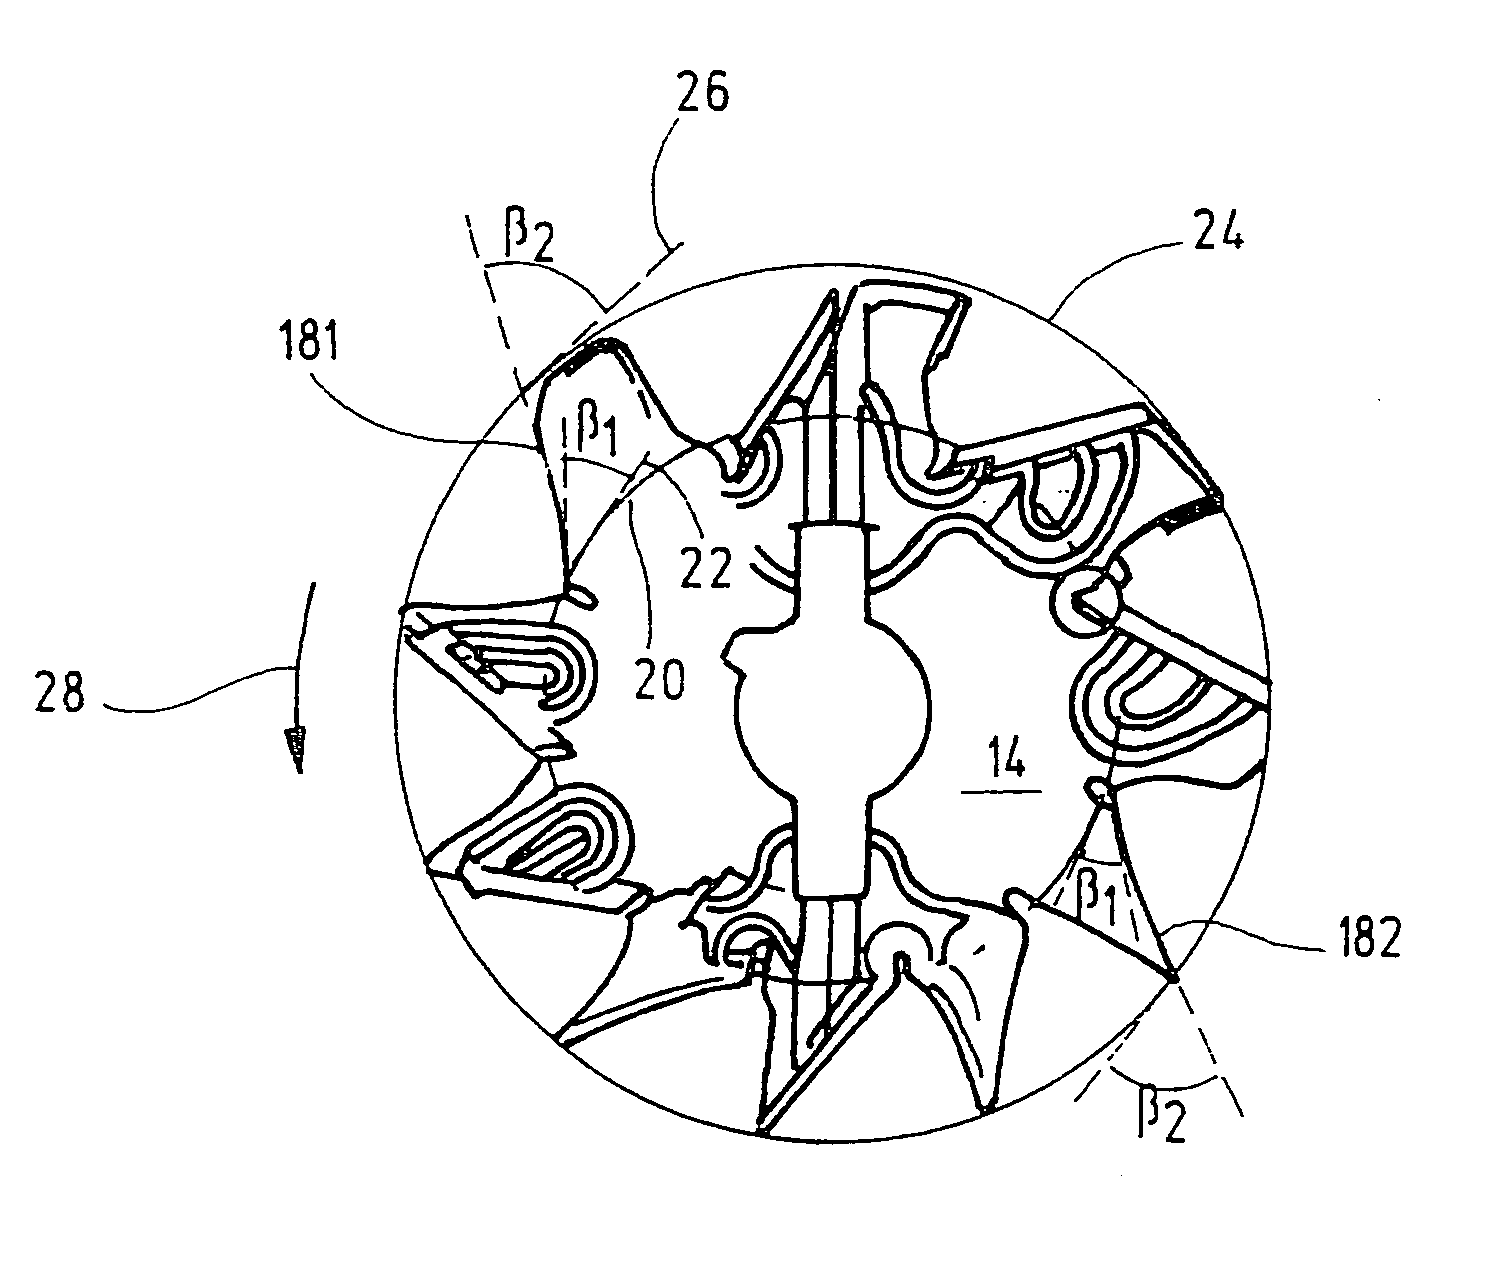 Radial fan wheel for transporting cooling air for an electric machine